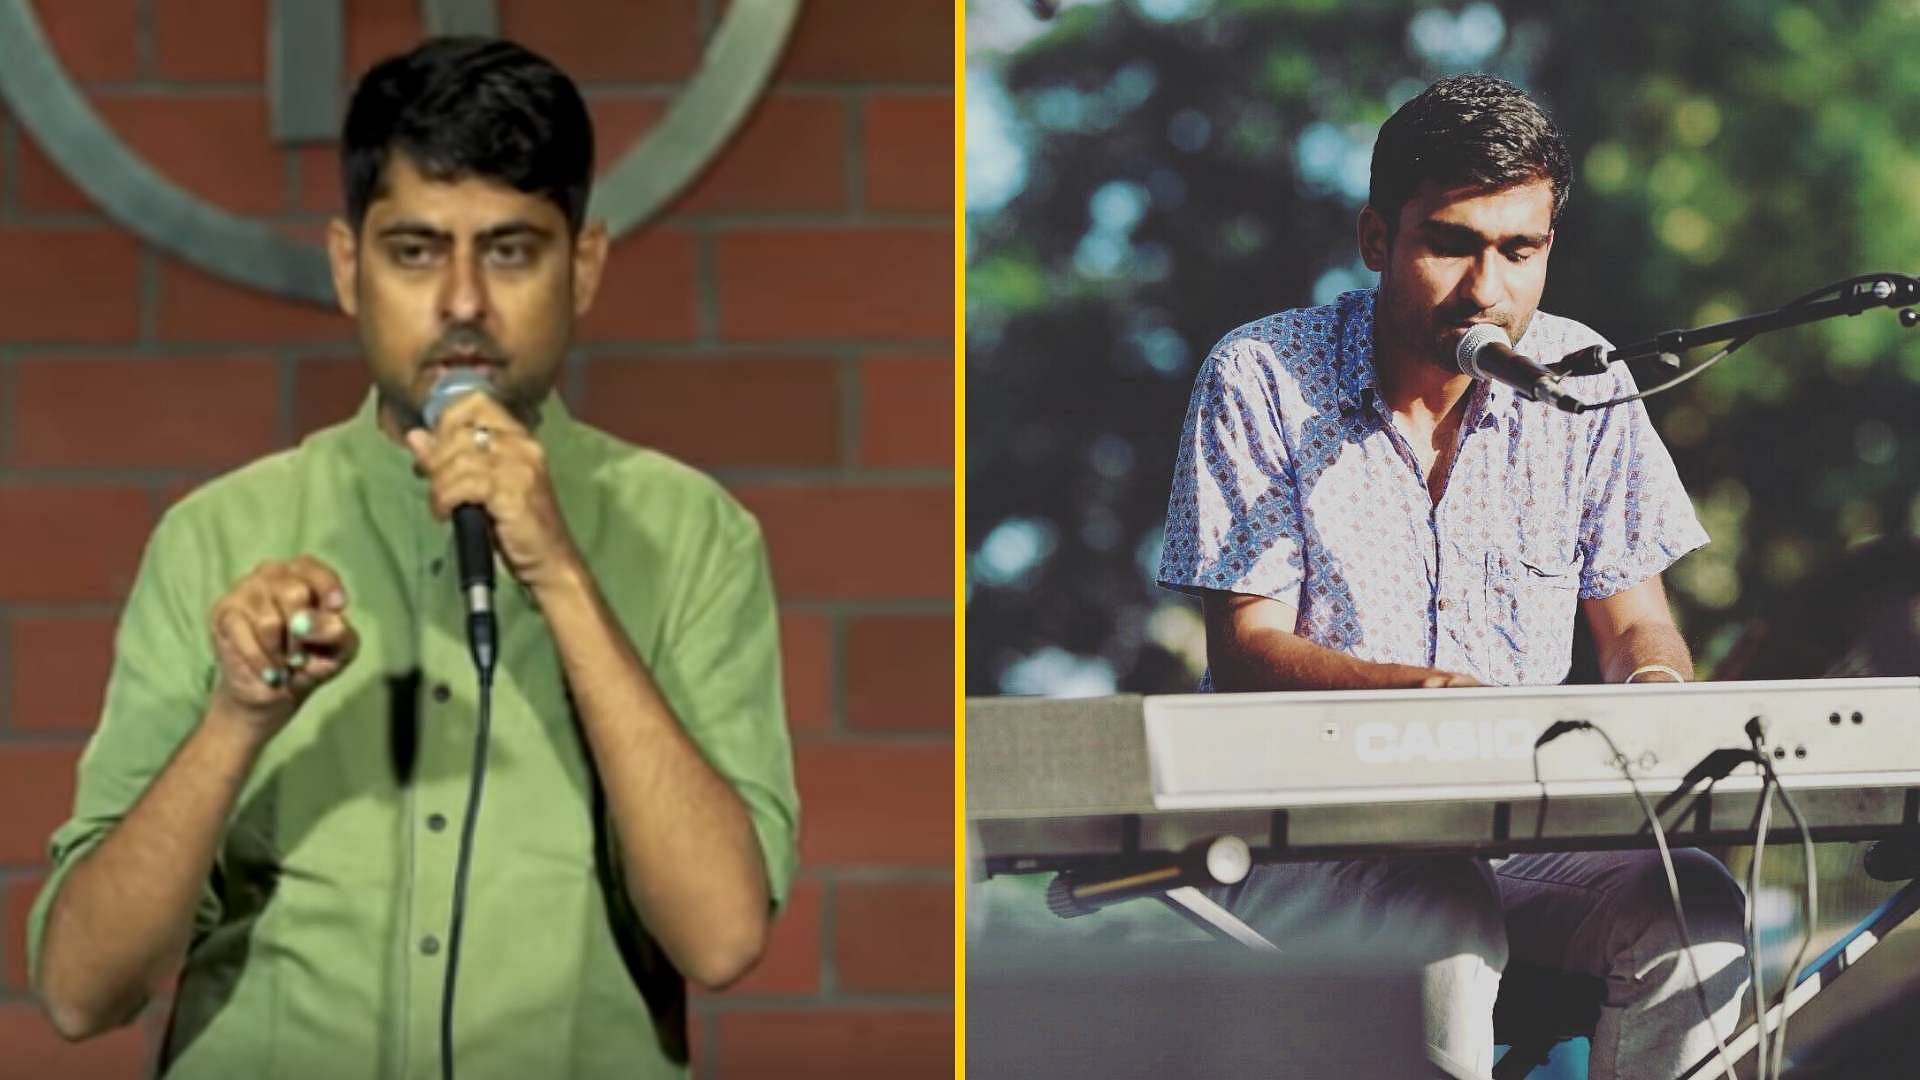 Varun Grover, Prateek Kuhad and other artists will stream live performances till 31 March.